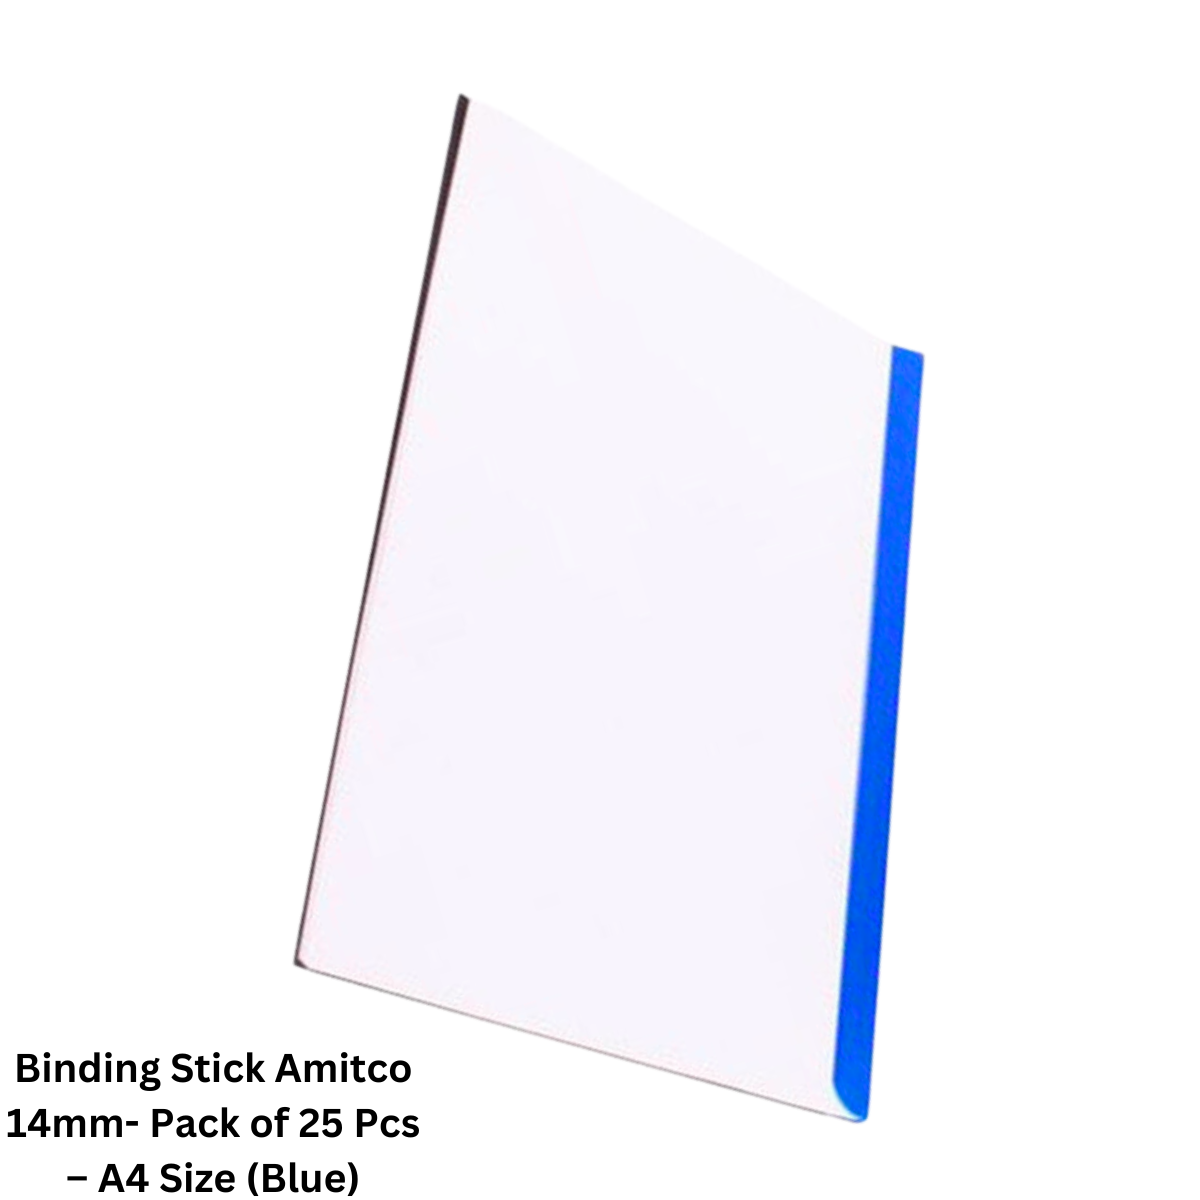 Amitco 14mm binding sticks in black, blue, and white, packaged in a set of 20, perfect for securely binding A4 documents in a professional manner.